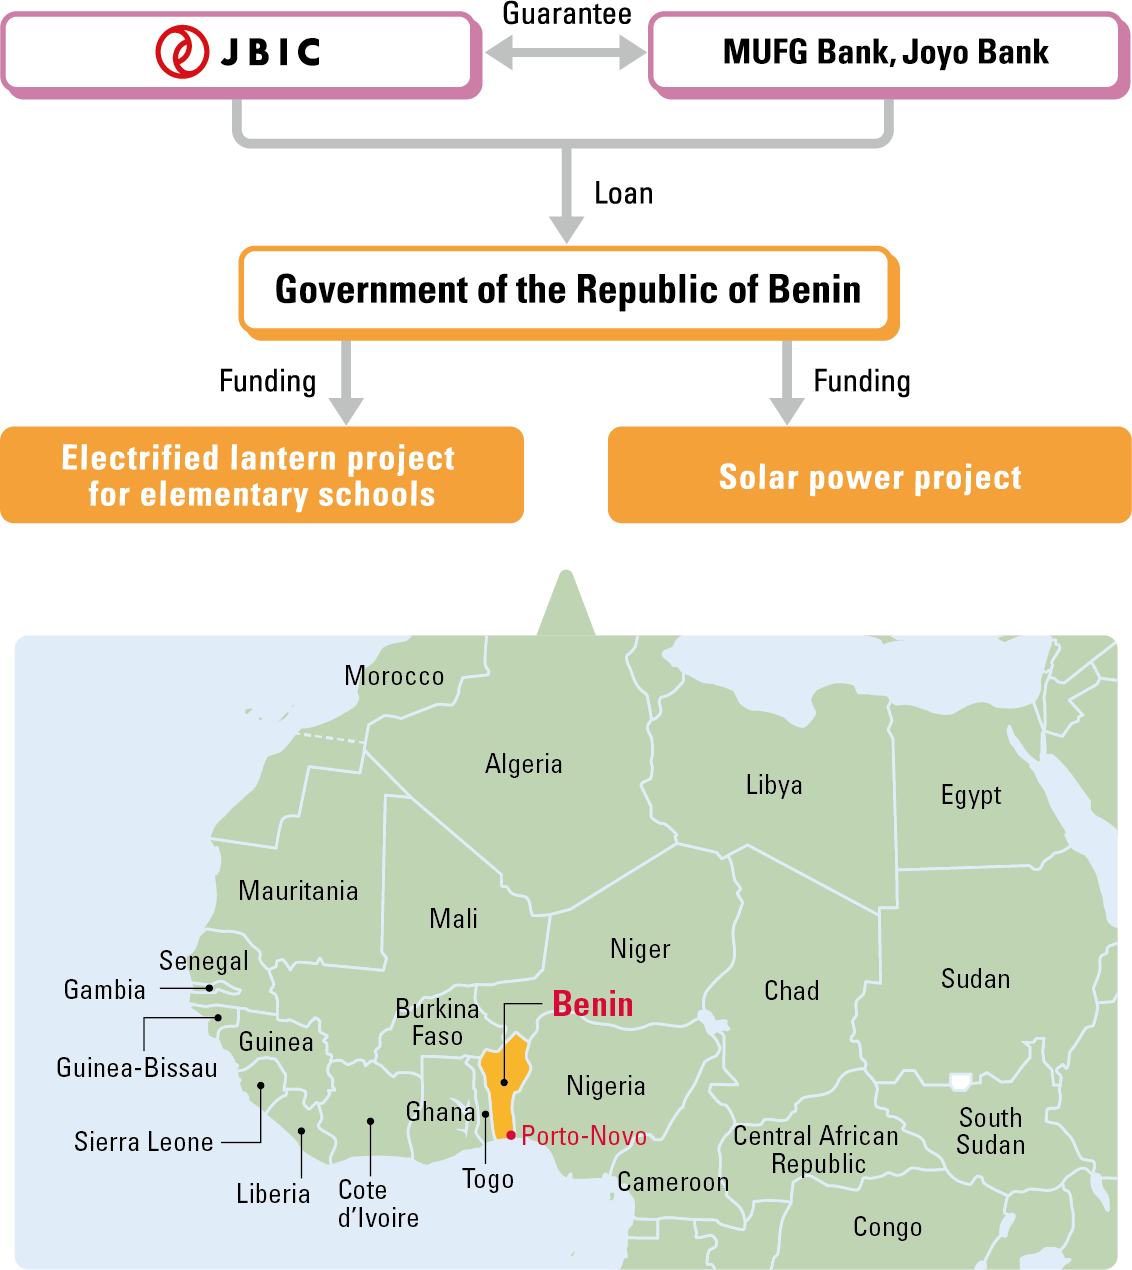 Image of Funds provided for two GREEN projects under a credit line with the Benin government